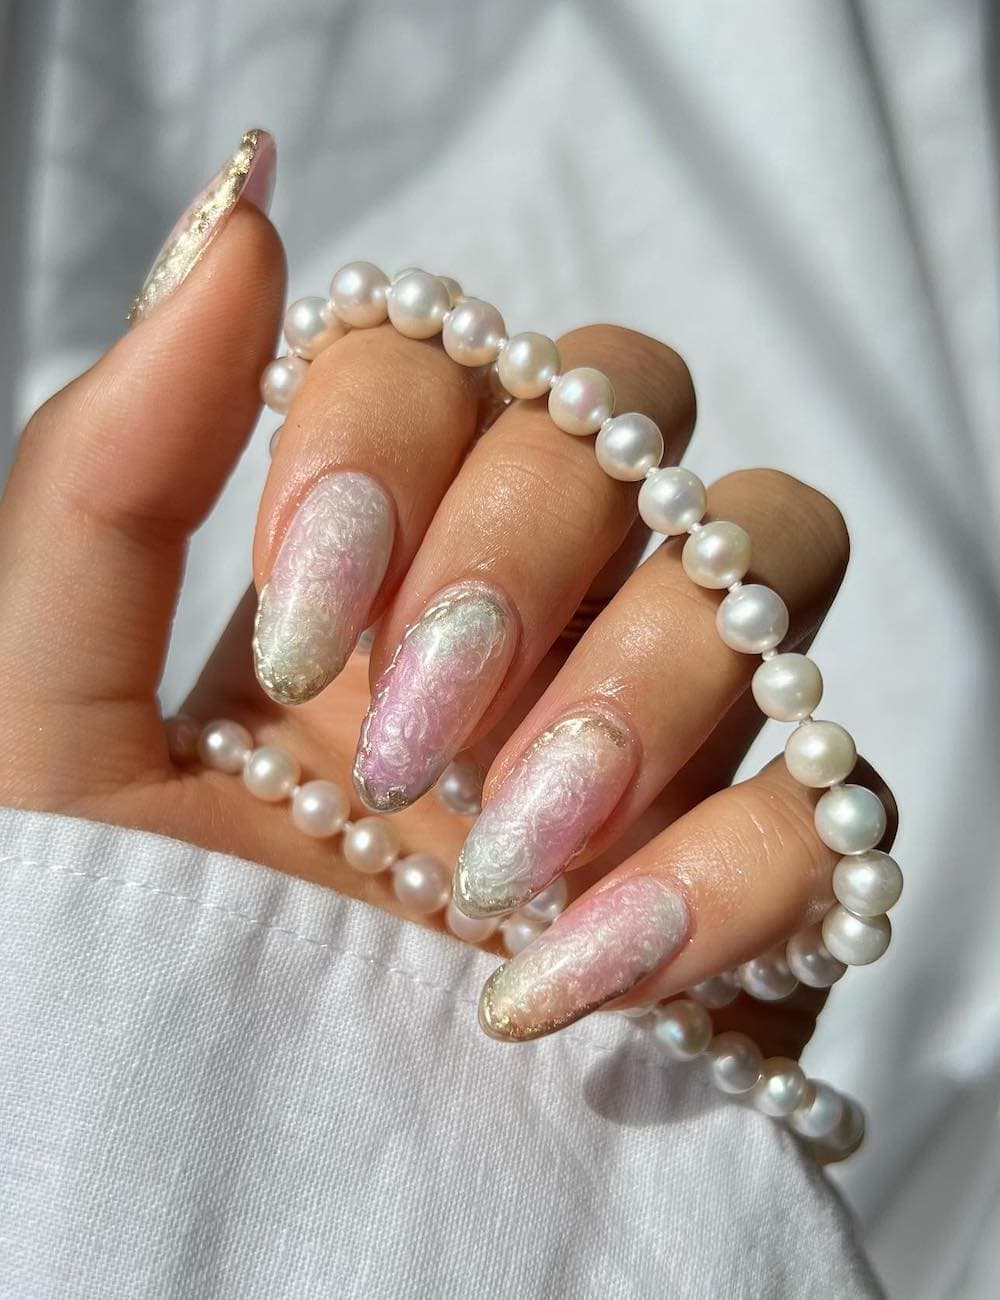 long almond nails with iridescent shades and a pearly finish